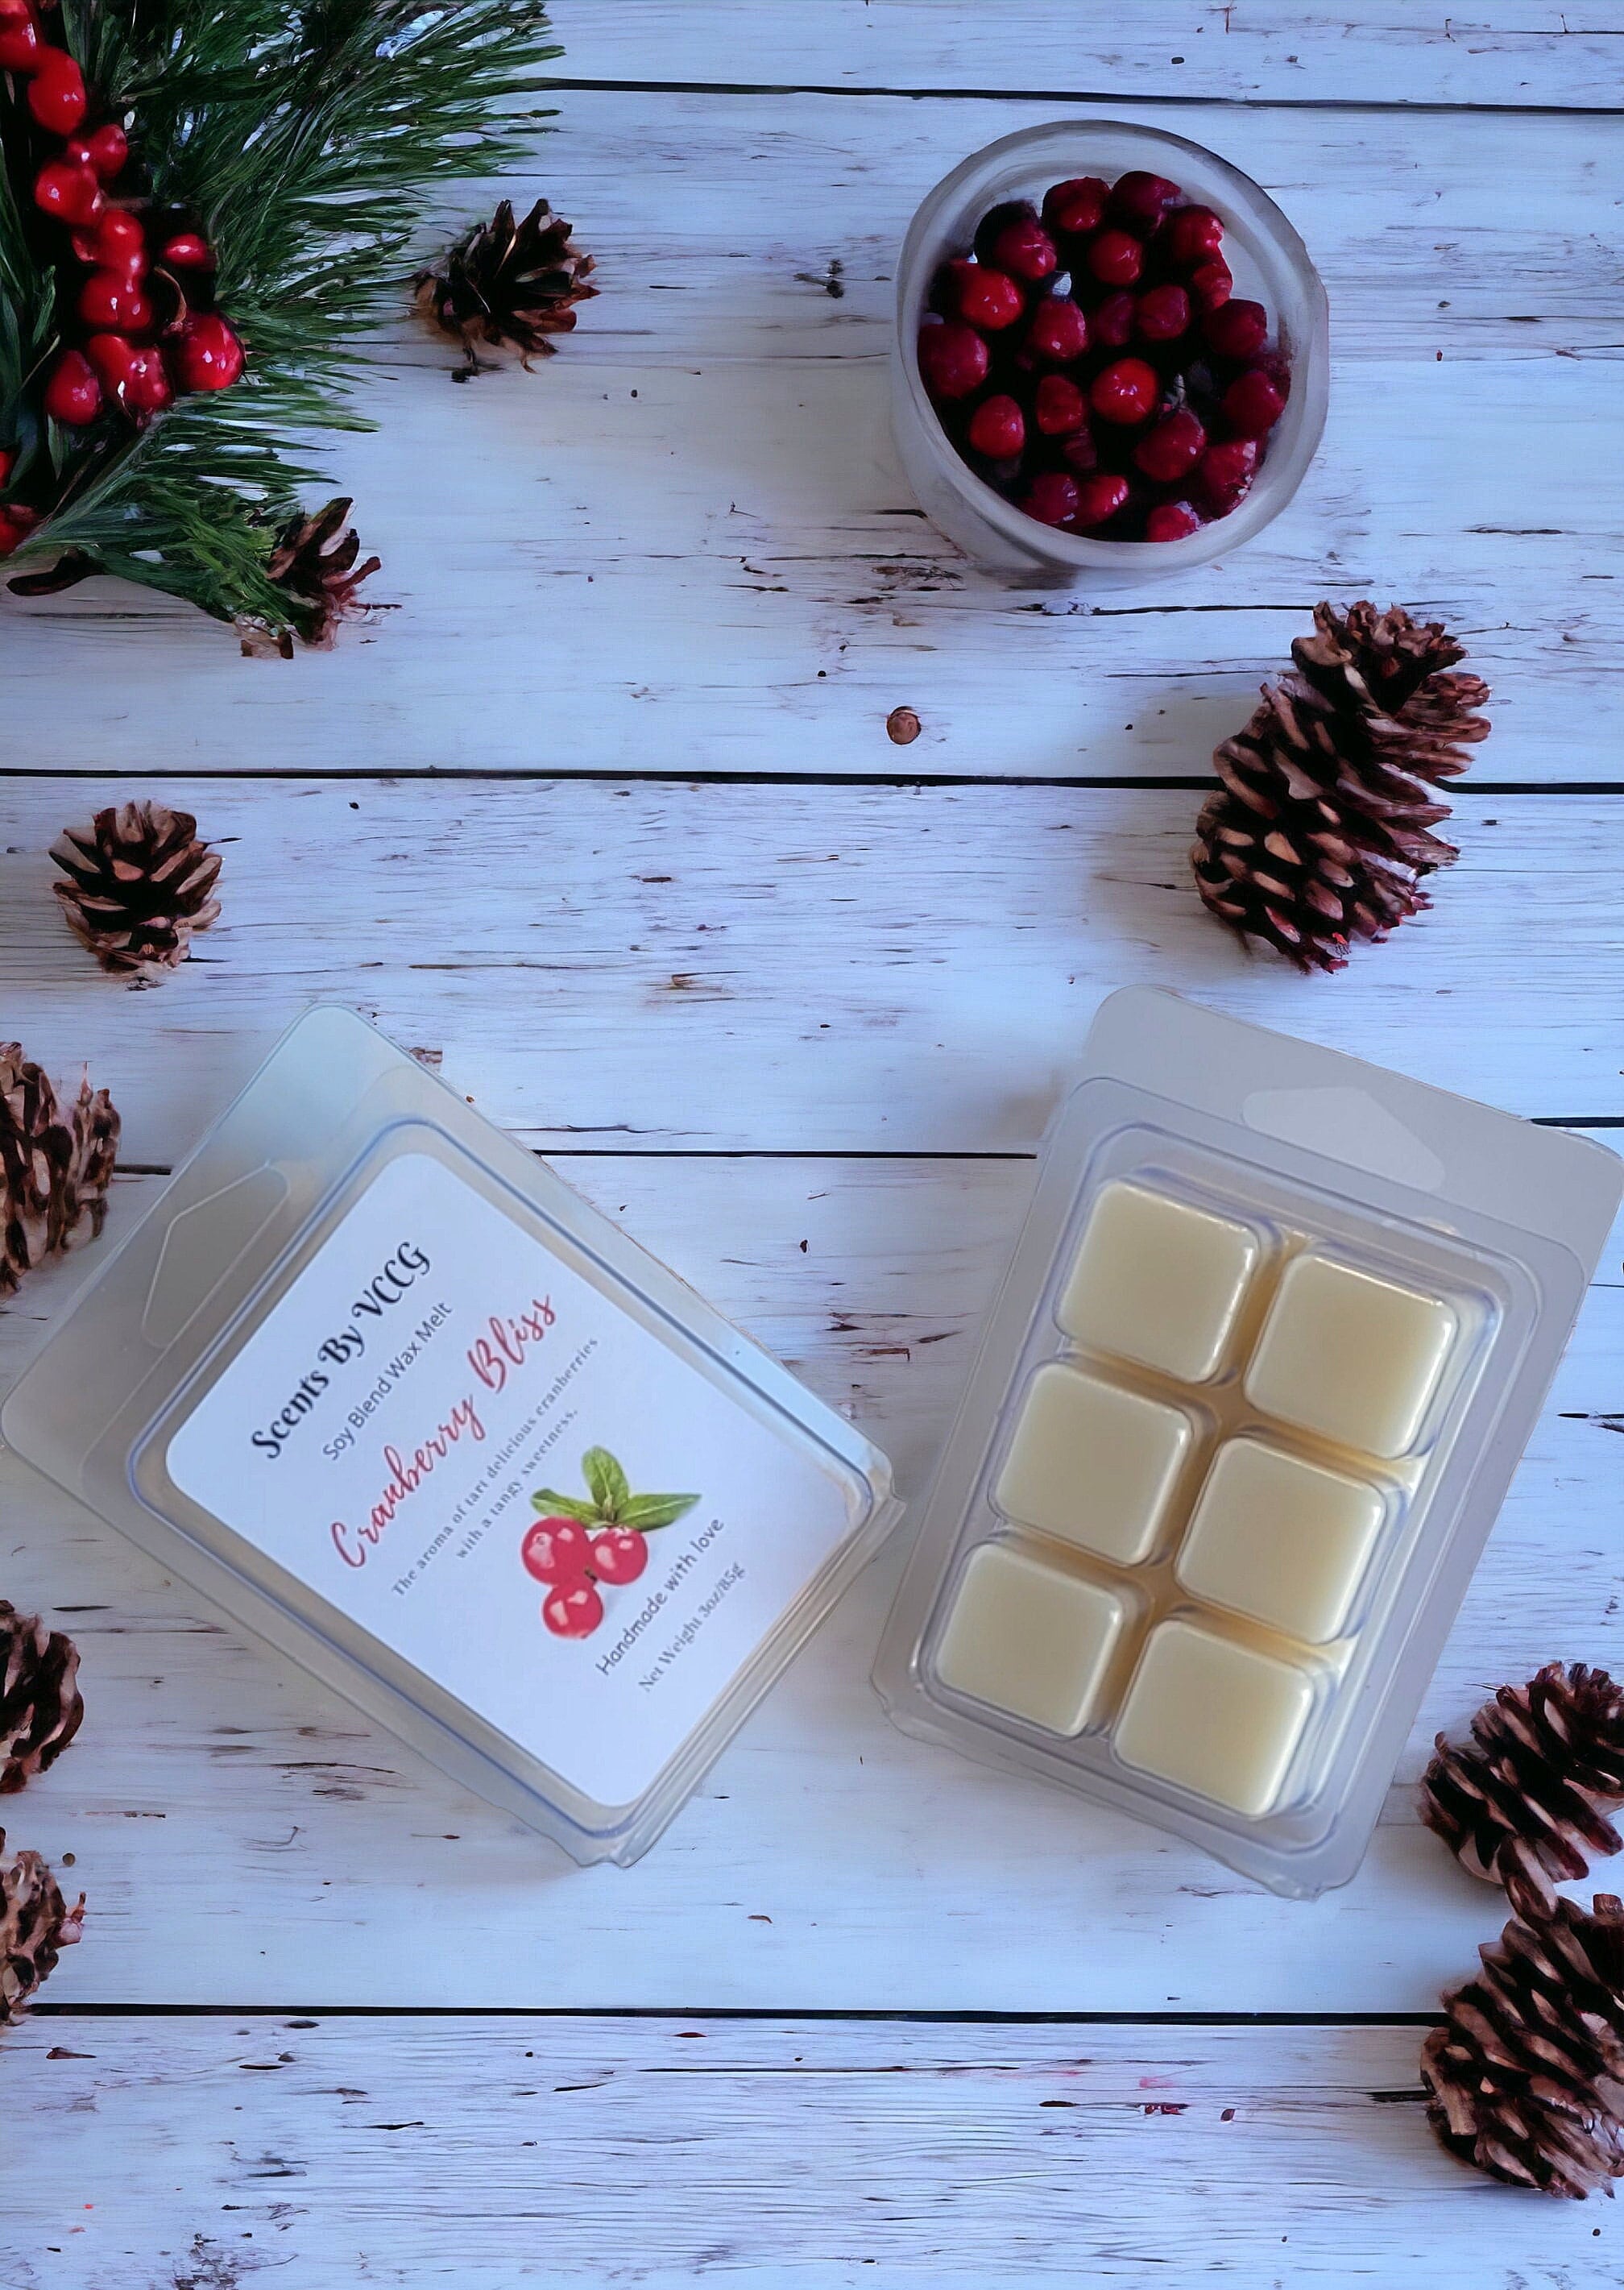 Winter bliss scoopies Limited Edition Christmas wax melts